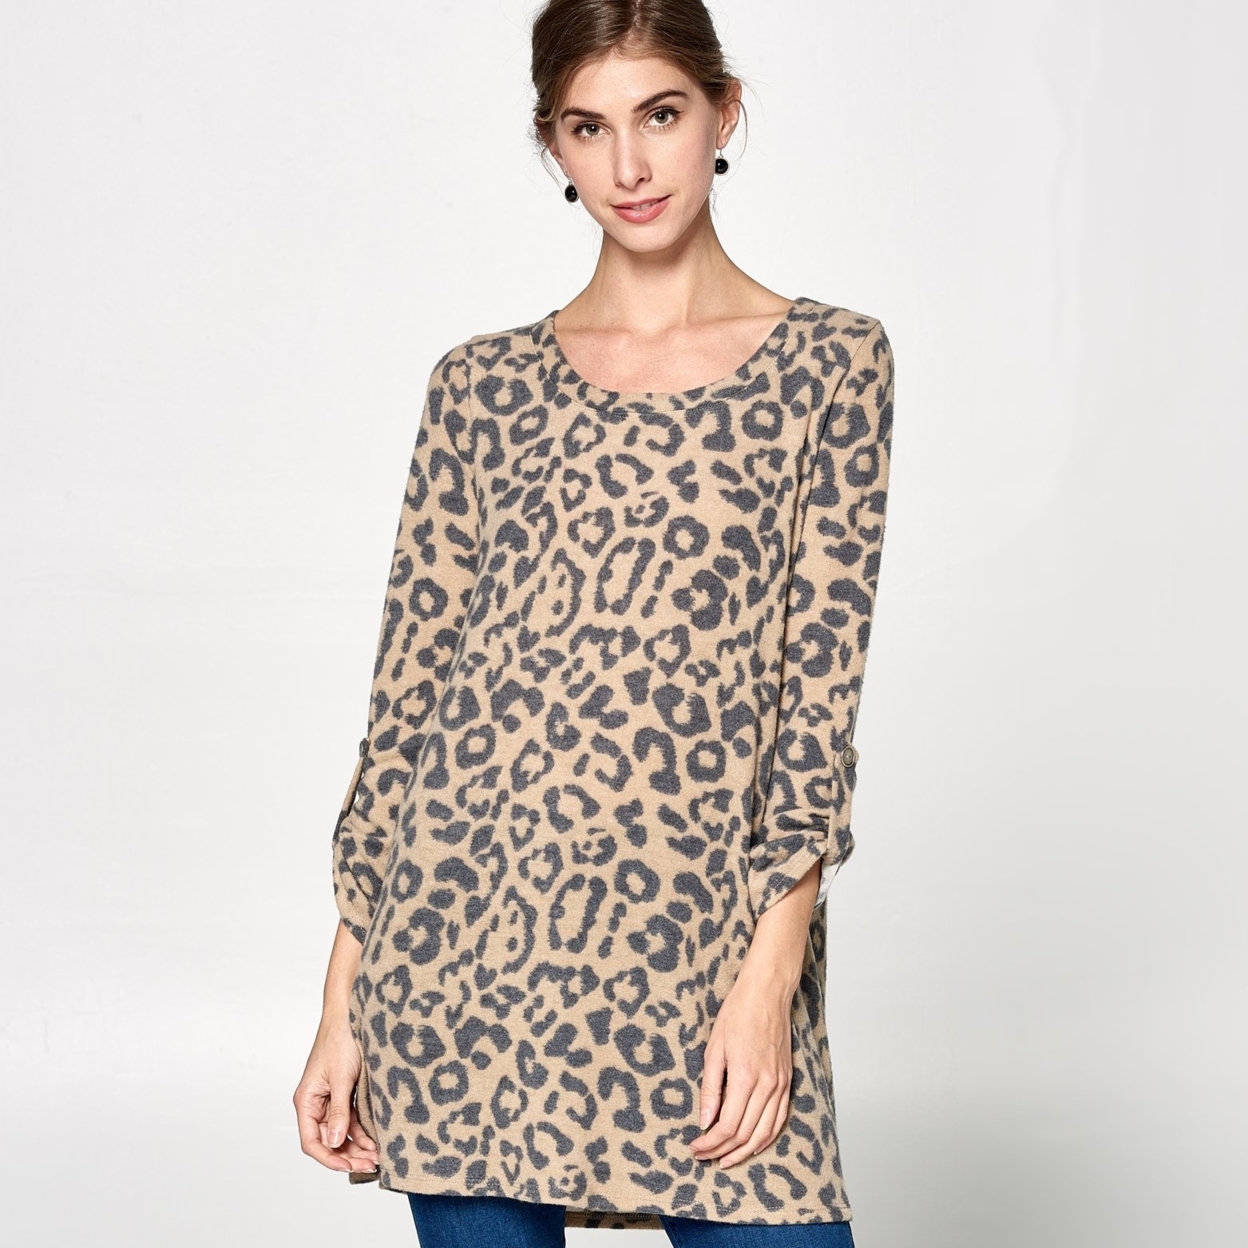 Three-Quarter Sleeve Leopard Tunic - Taupe/charcoal, Small (2-6)